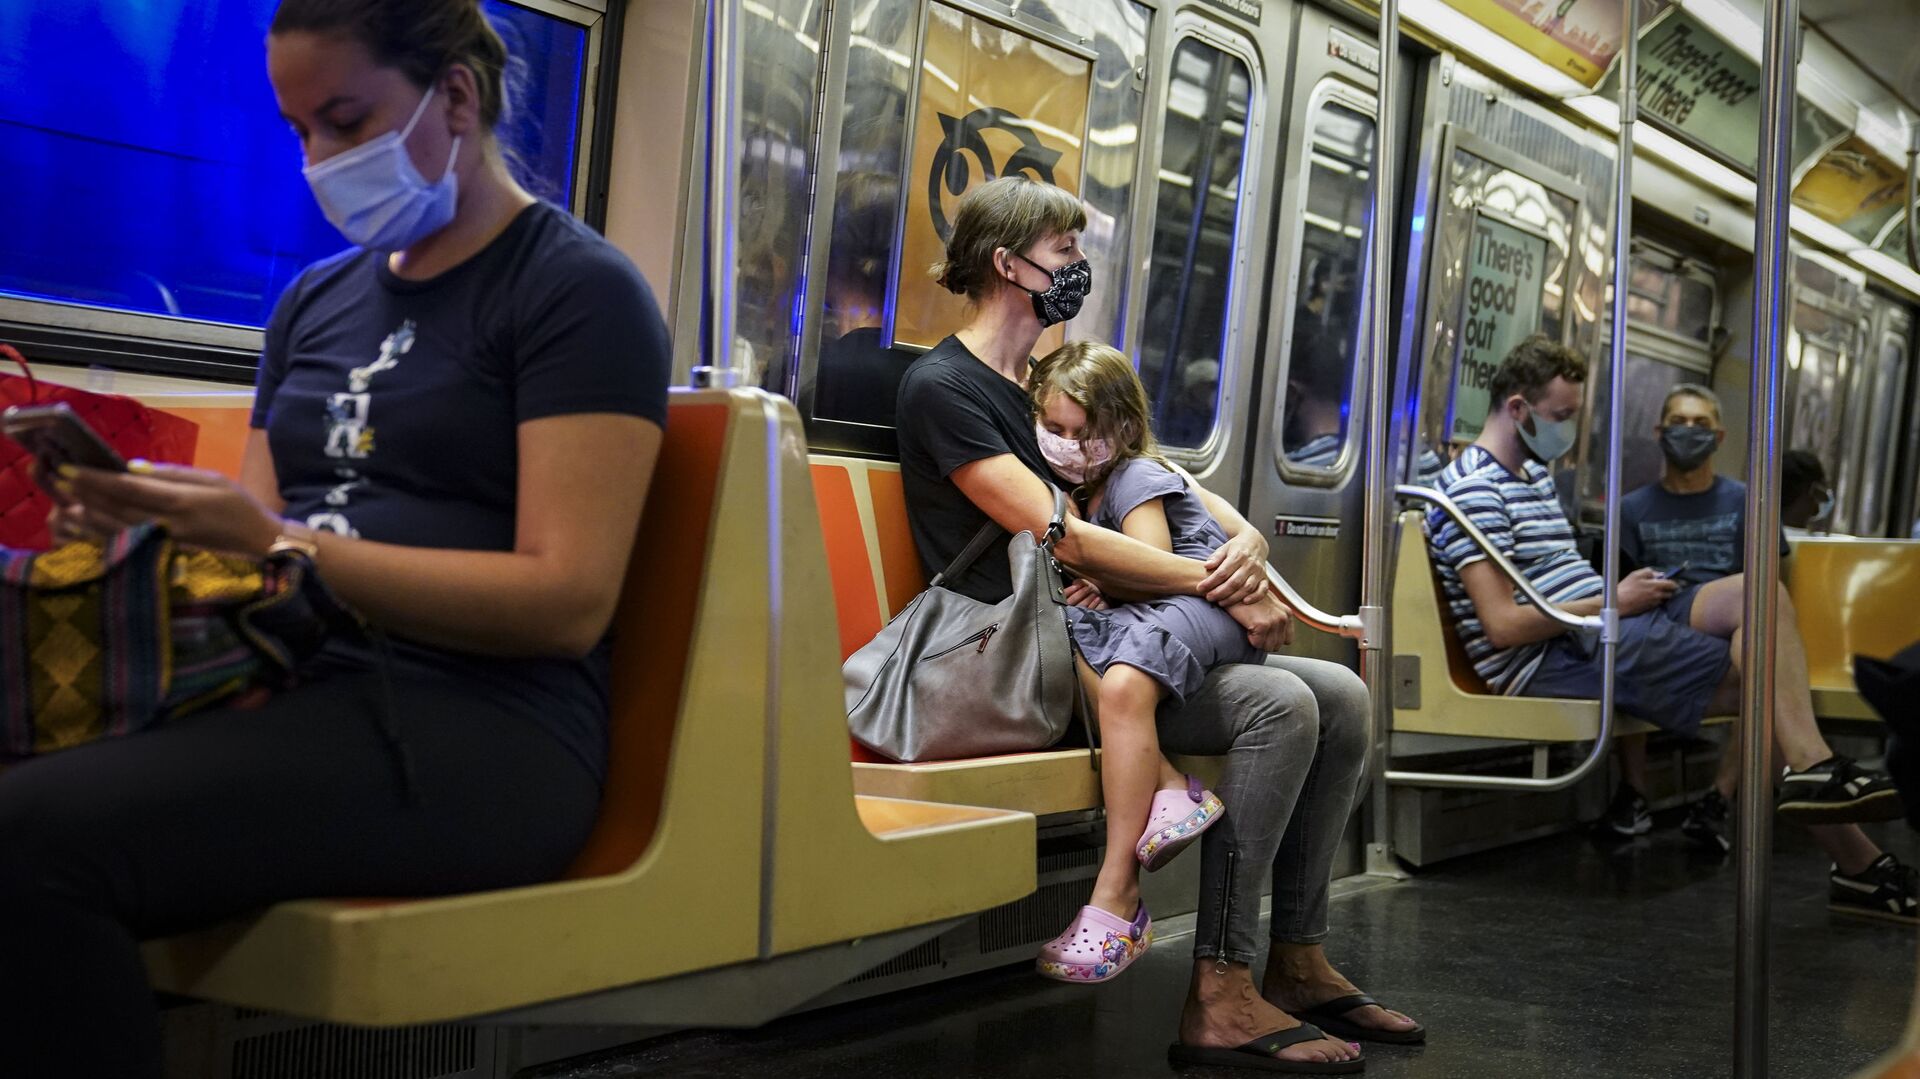 A child rests on a subway car while riders wear protective masks due to COVID-19 concerns, Monday, Aug. 17, 2020, in New York. - Sputnik International, 1920, 04.05.2022